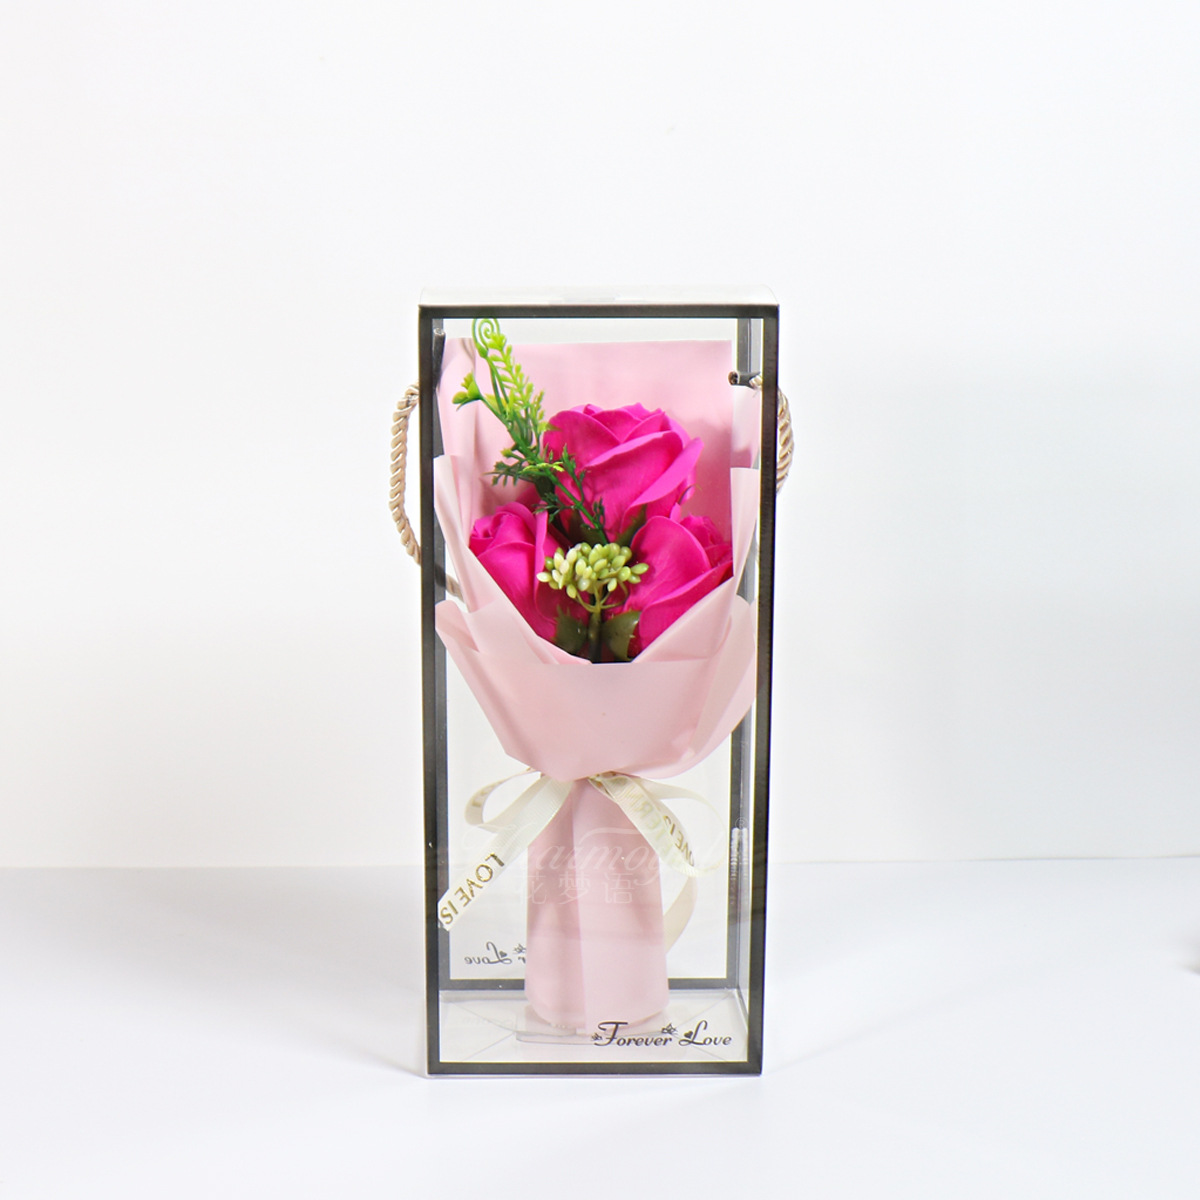 Soap Flower Bouquet Rose Carnation Small Bouquet Soap Flower Mother's Day Teacher's Day Valentine's Day Gift Cross-Border